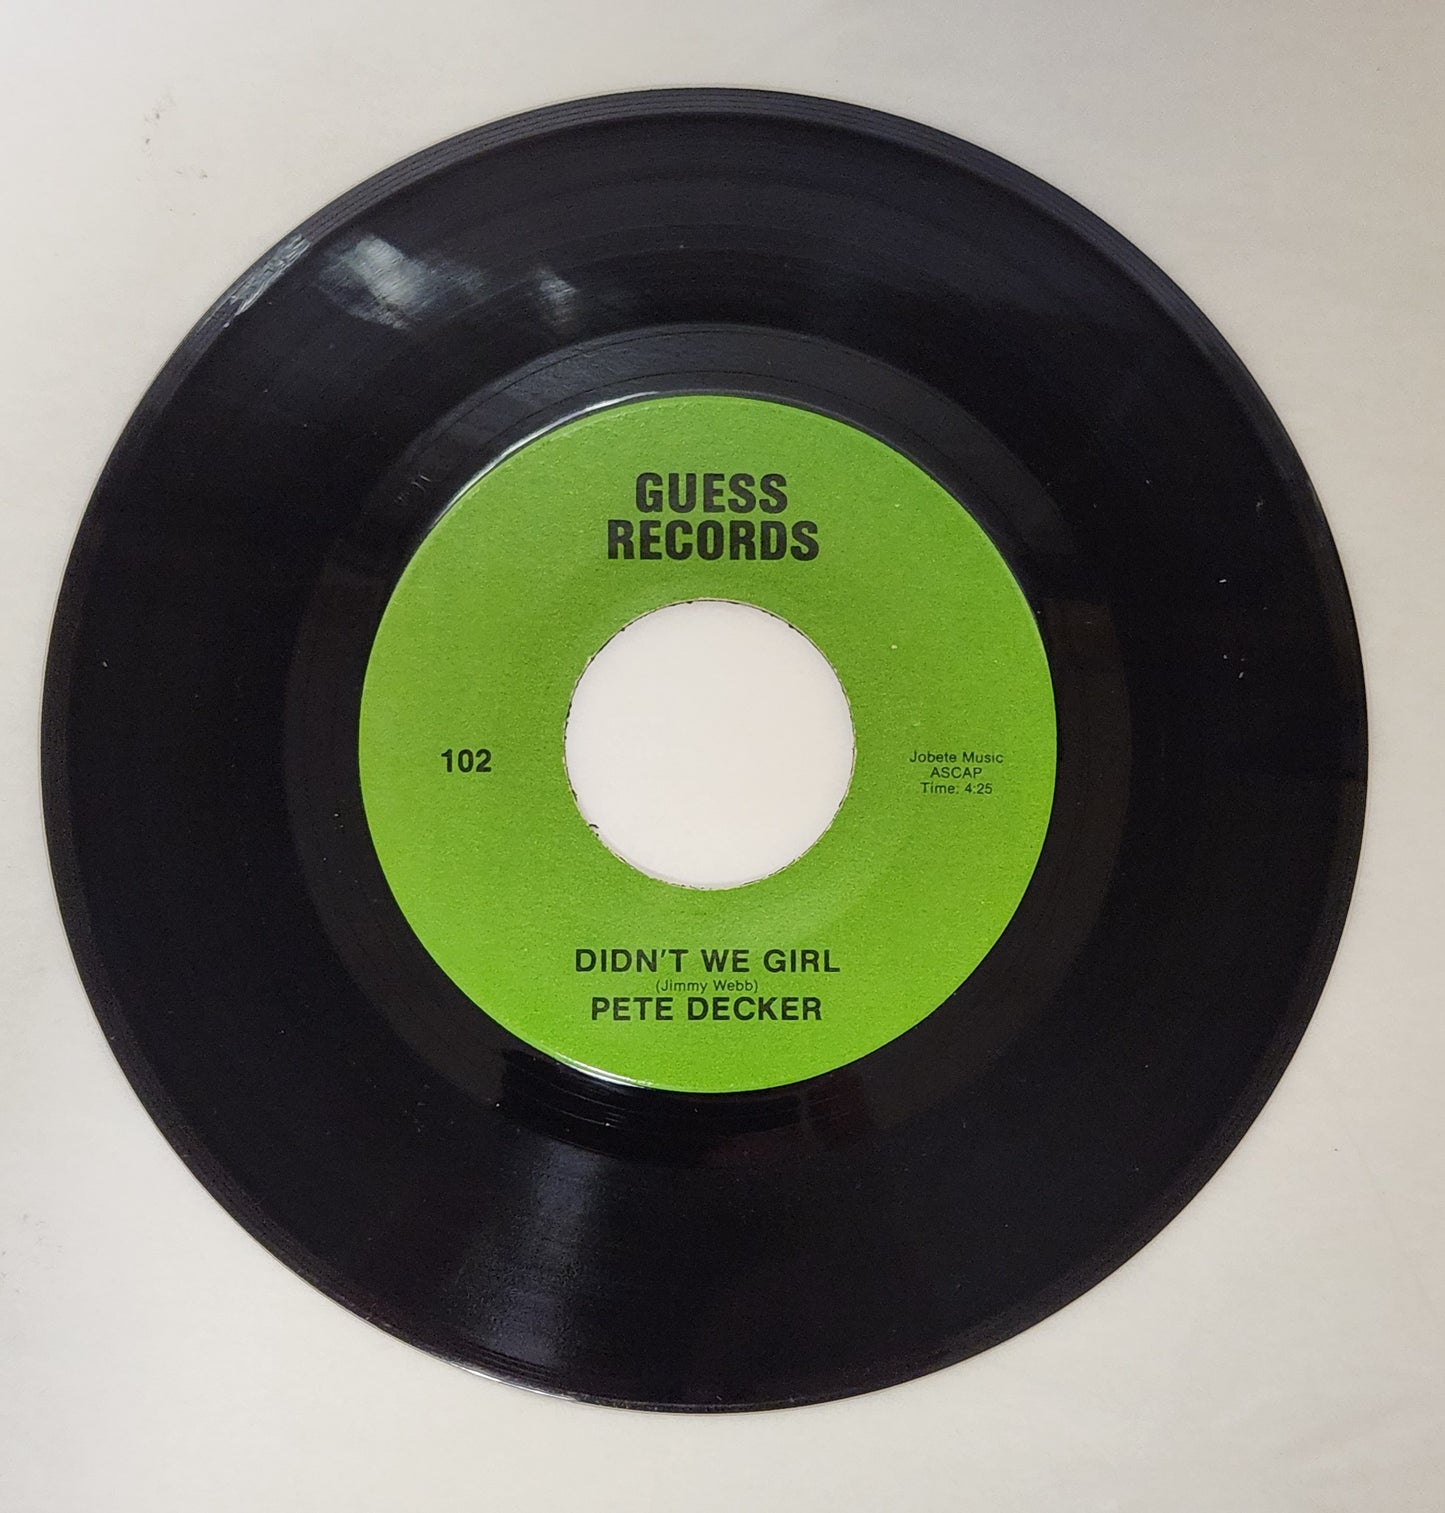 Pete Decker "Didn't We Girl / I Think Of You" Norfolk VA Funk & Soul 7" Single (Guess Records)